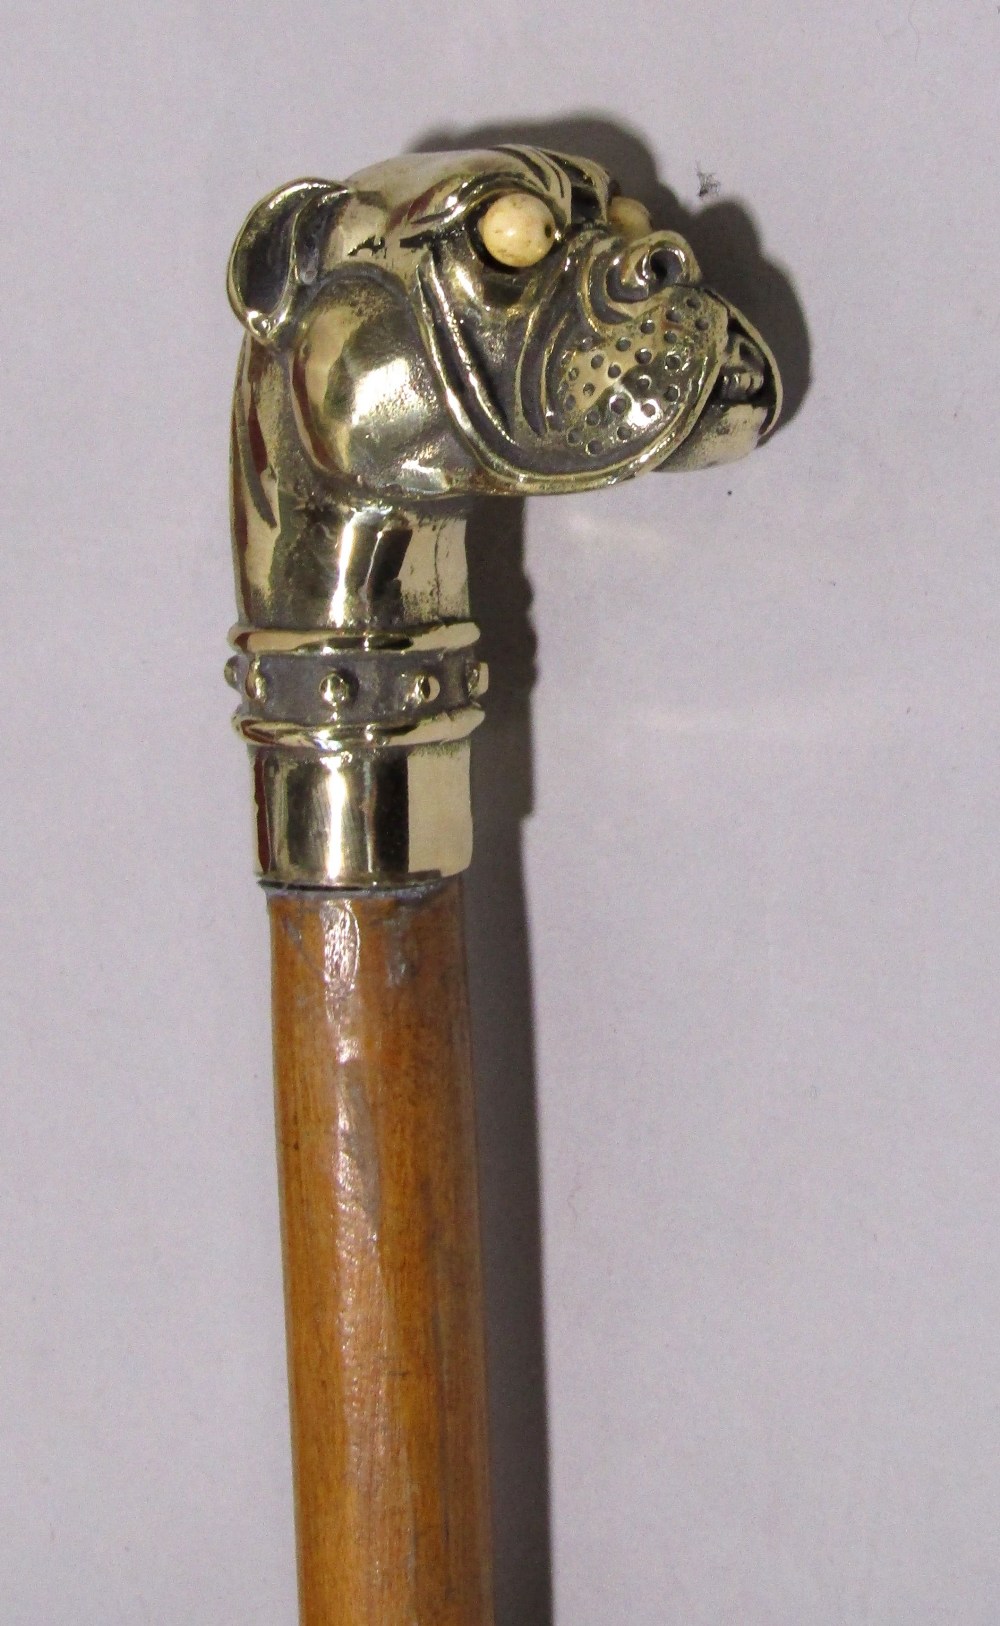 Malacca walking stick with cast brass humorous dog head finial with bone eyes